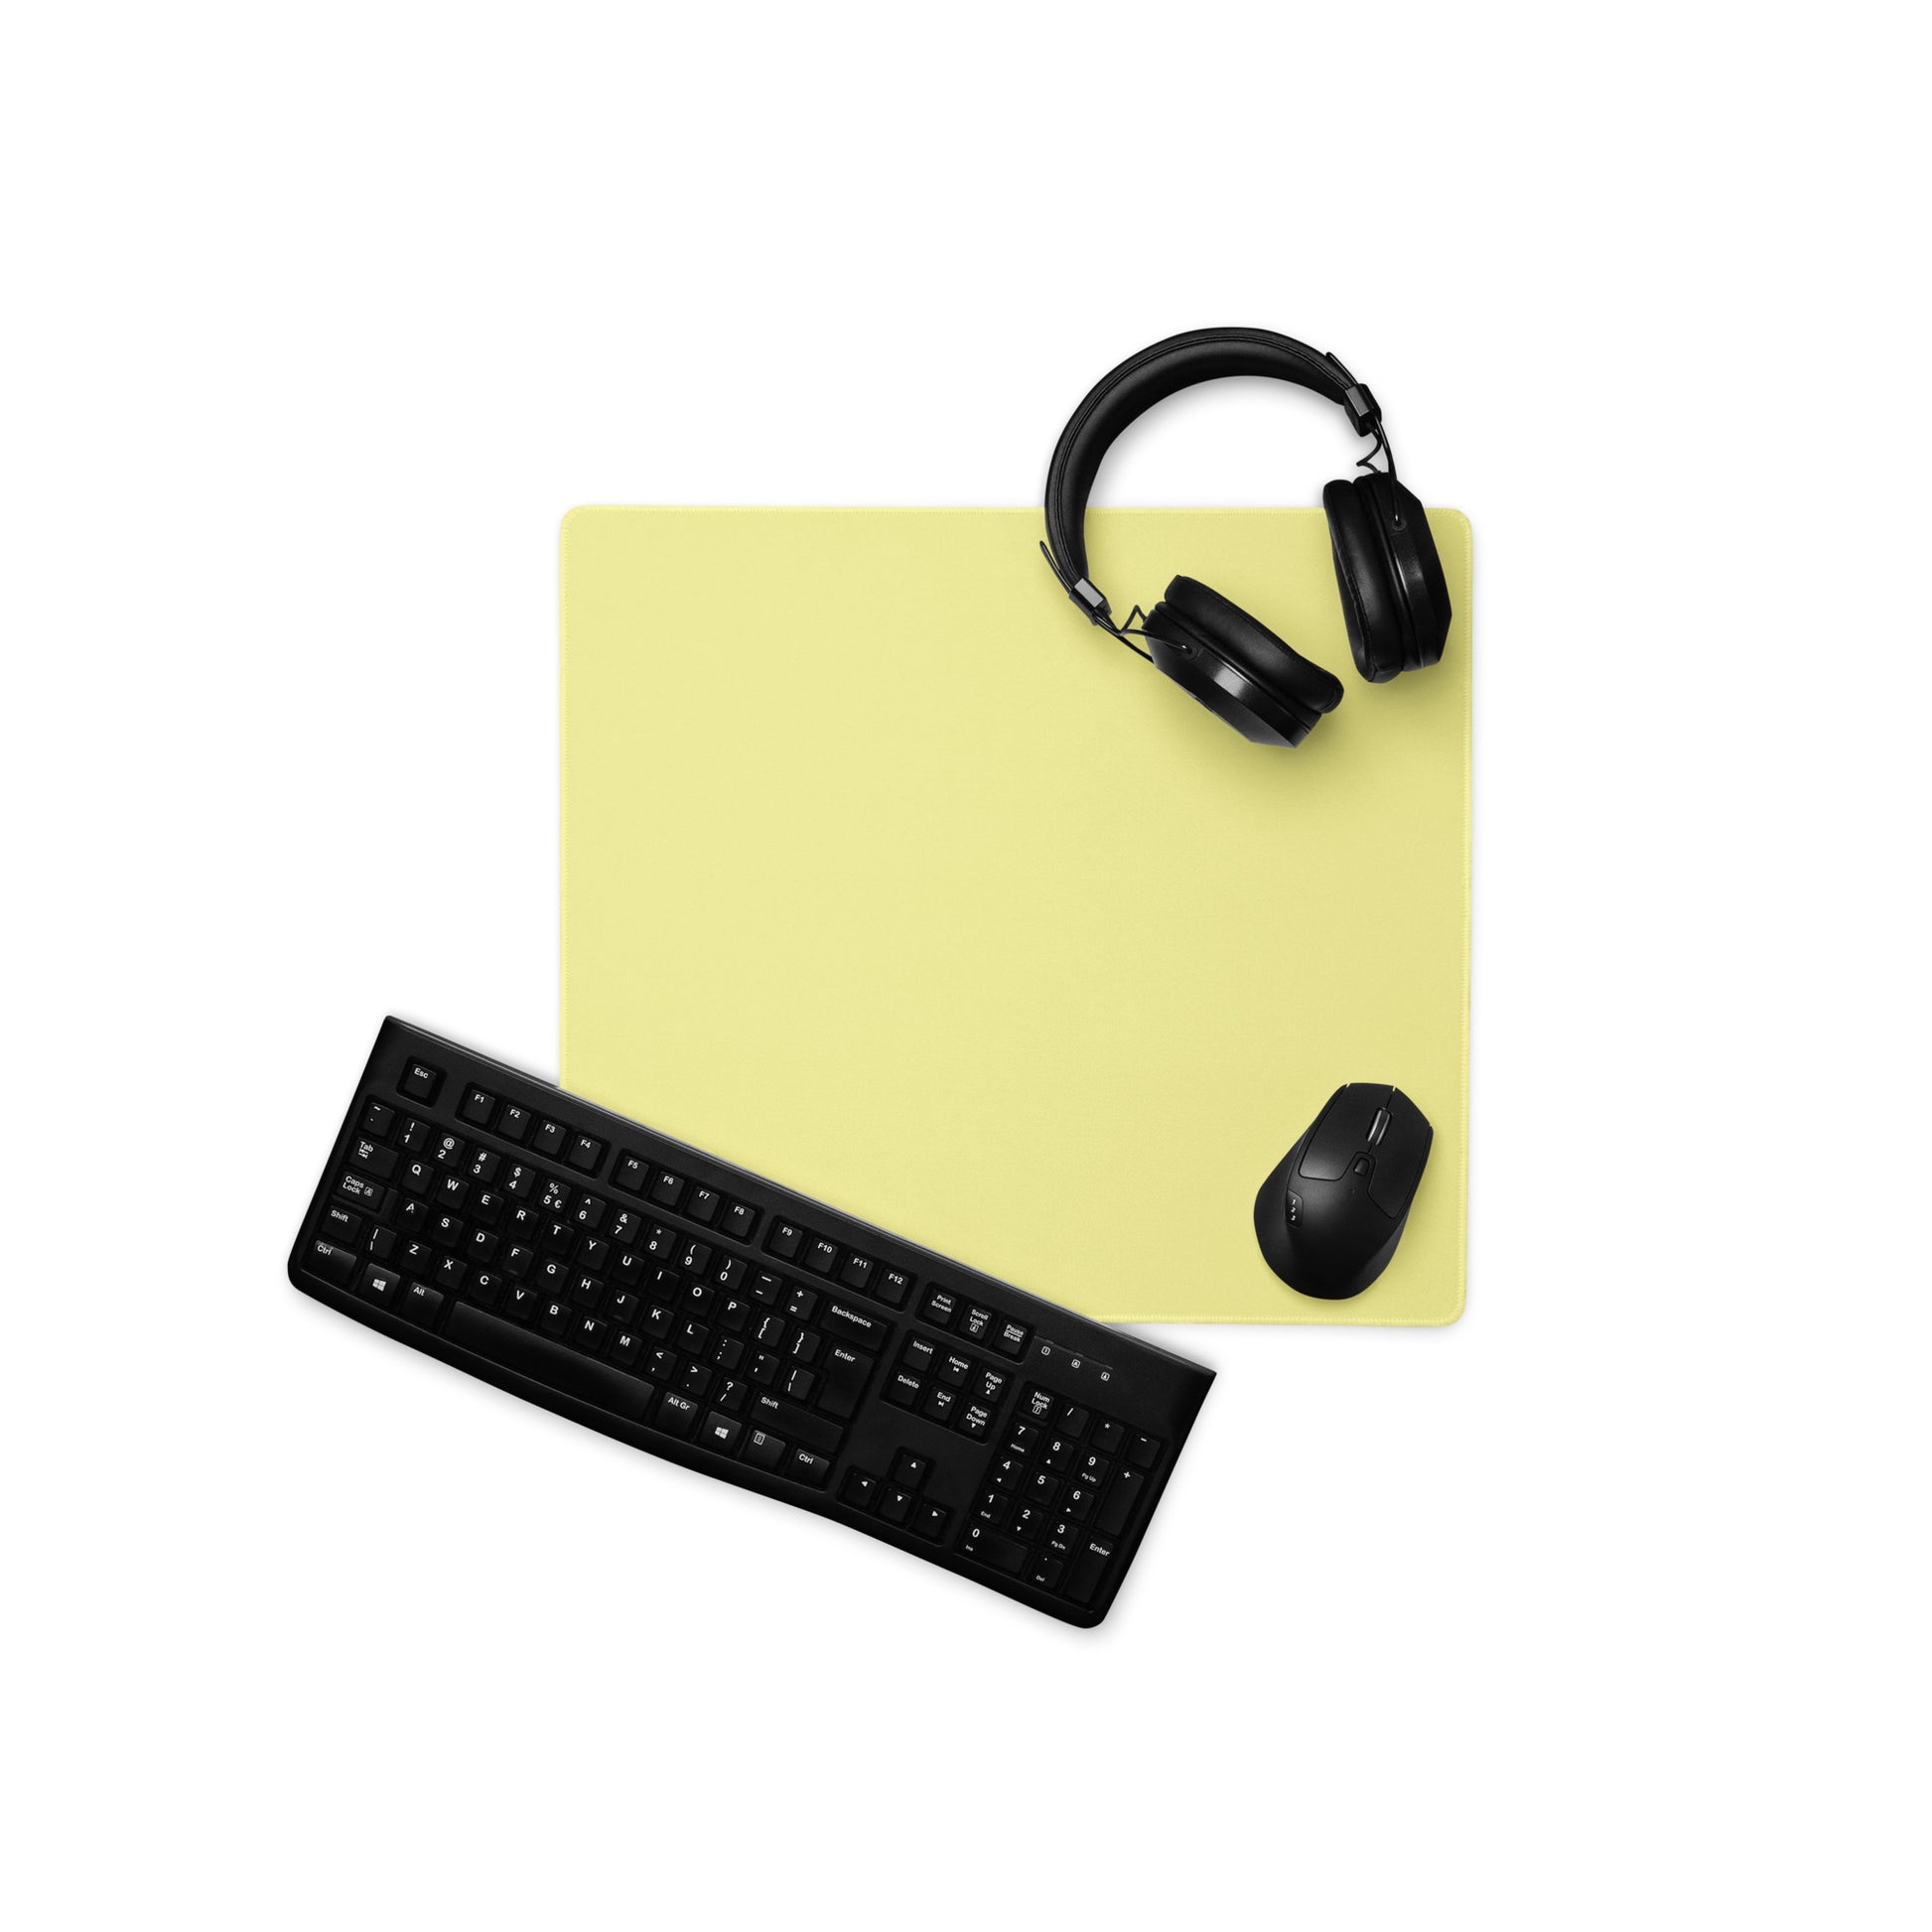 An 18" x 16" yellow gaming desk pad with a keyboard, mouse, and headphones sitting on it.